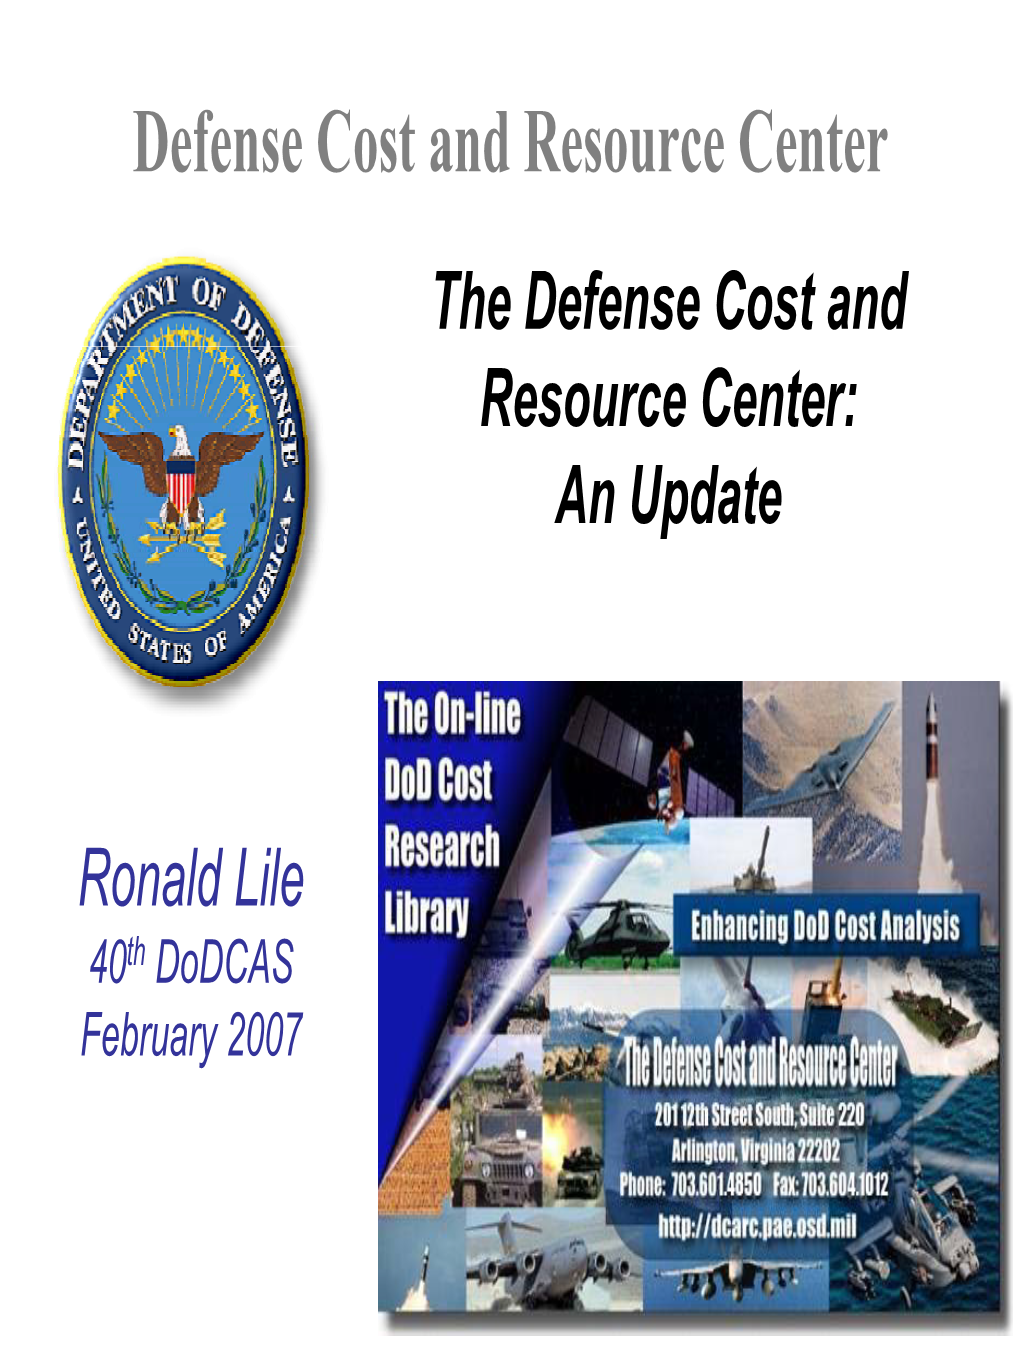 Defense Cost and Resource Center the Defense Cost and Resource Center: an Update